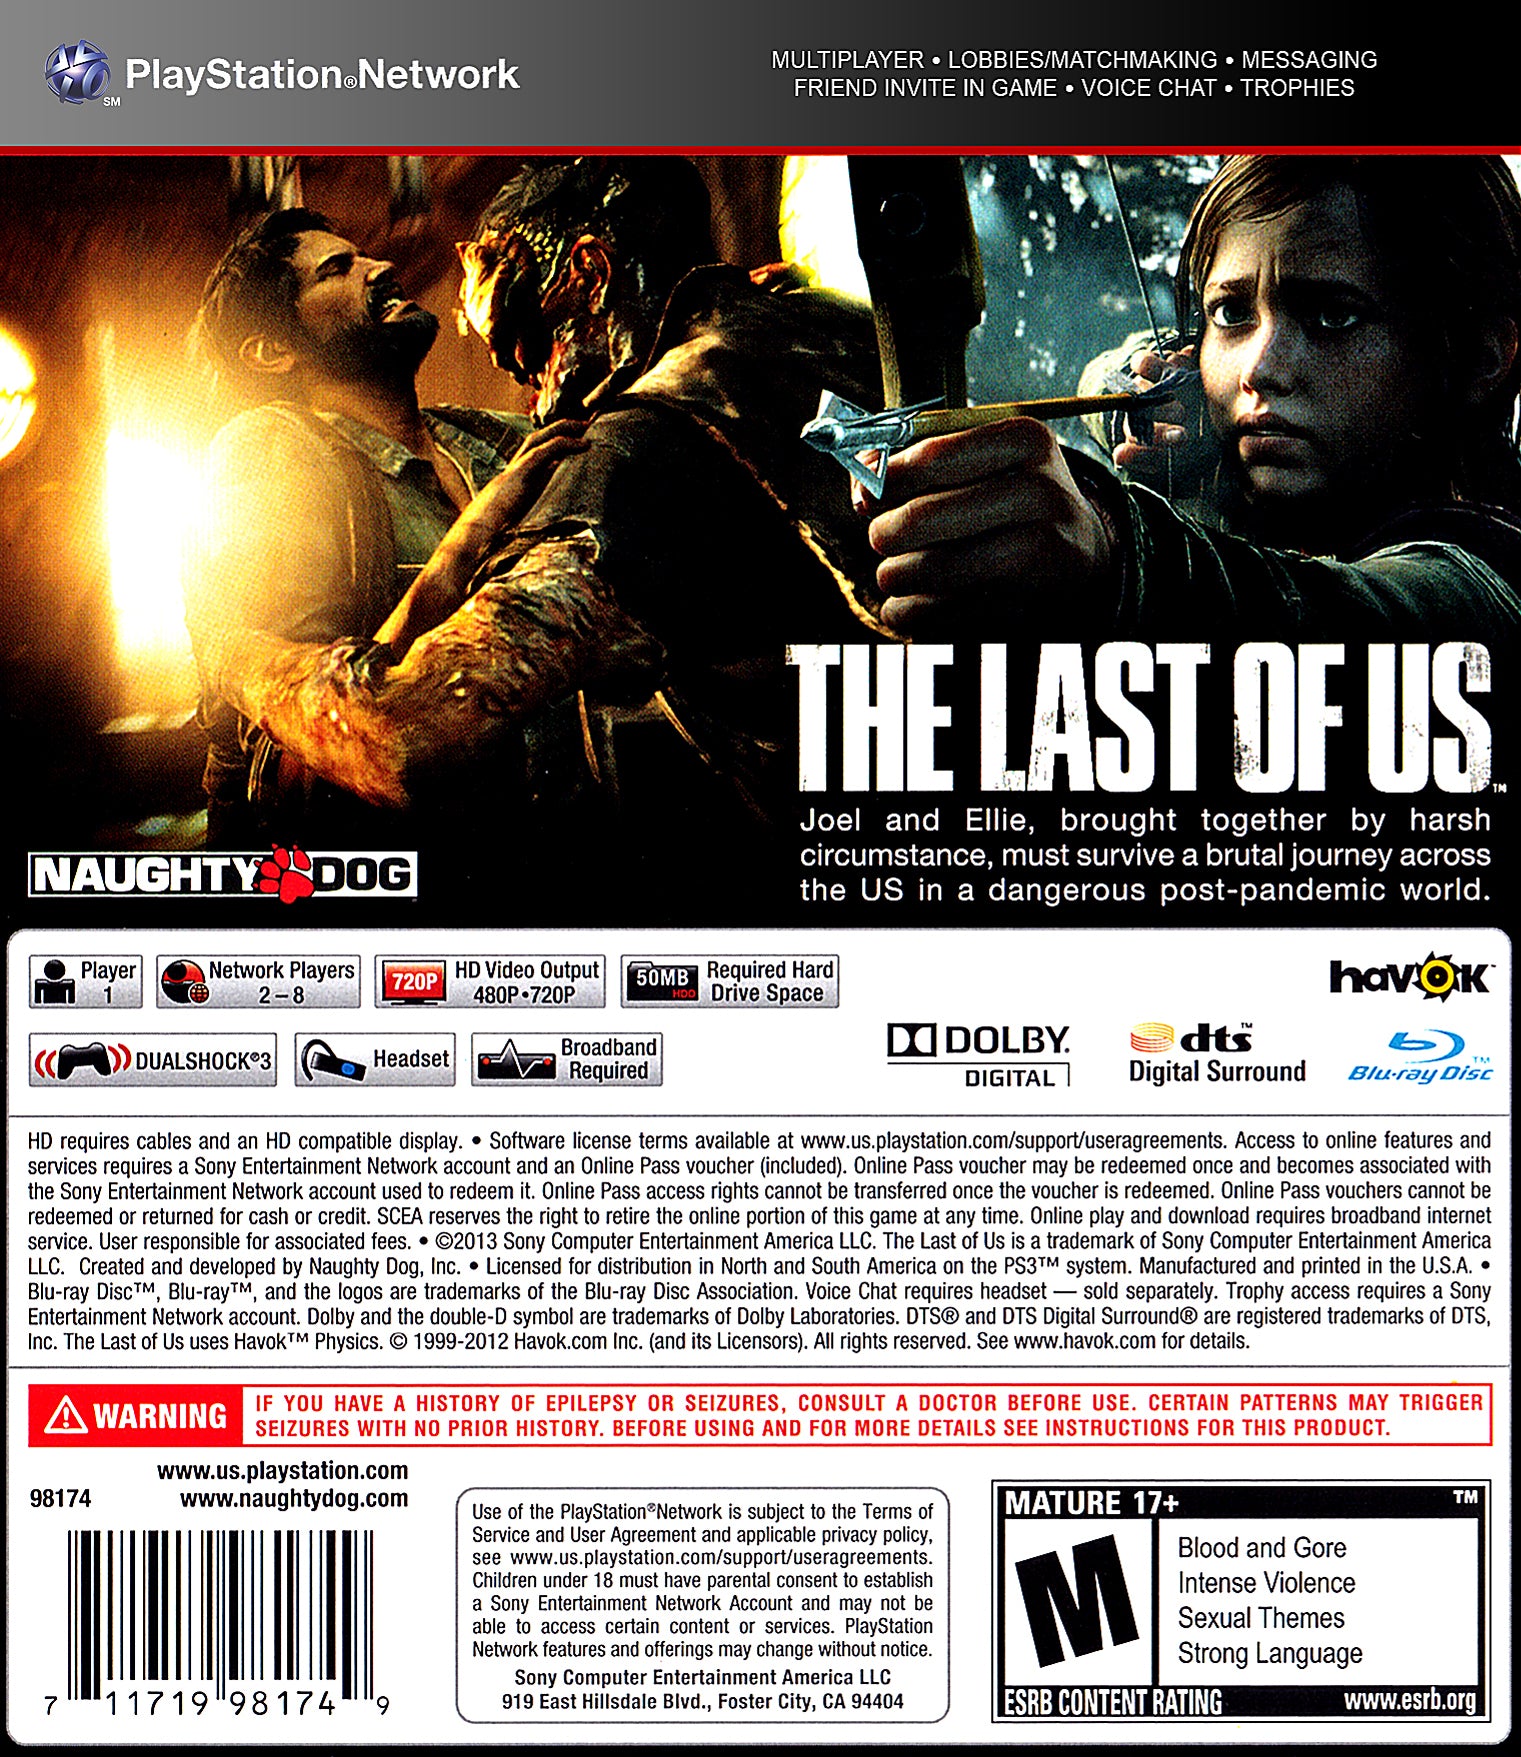 The Last Of Us - PlayStation 3 (PS3) Game - YourGamingShop.com - Buy, Sell, Trade Video Games Online. 120 Day Warranty. Satisfaction Guaranteed.